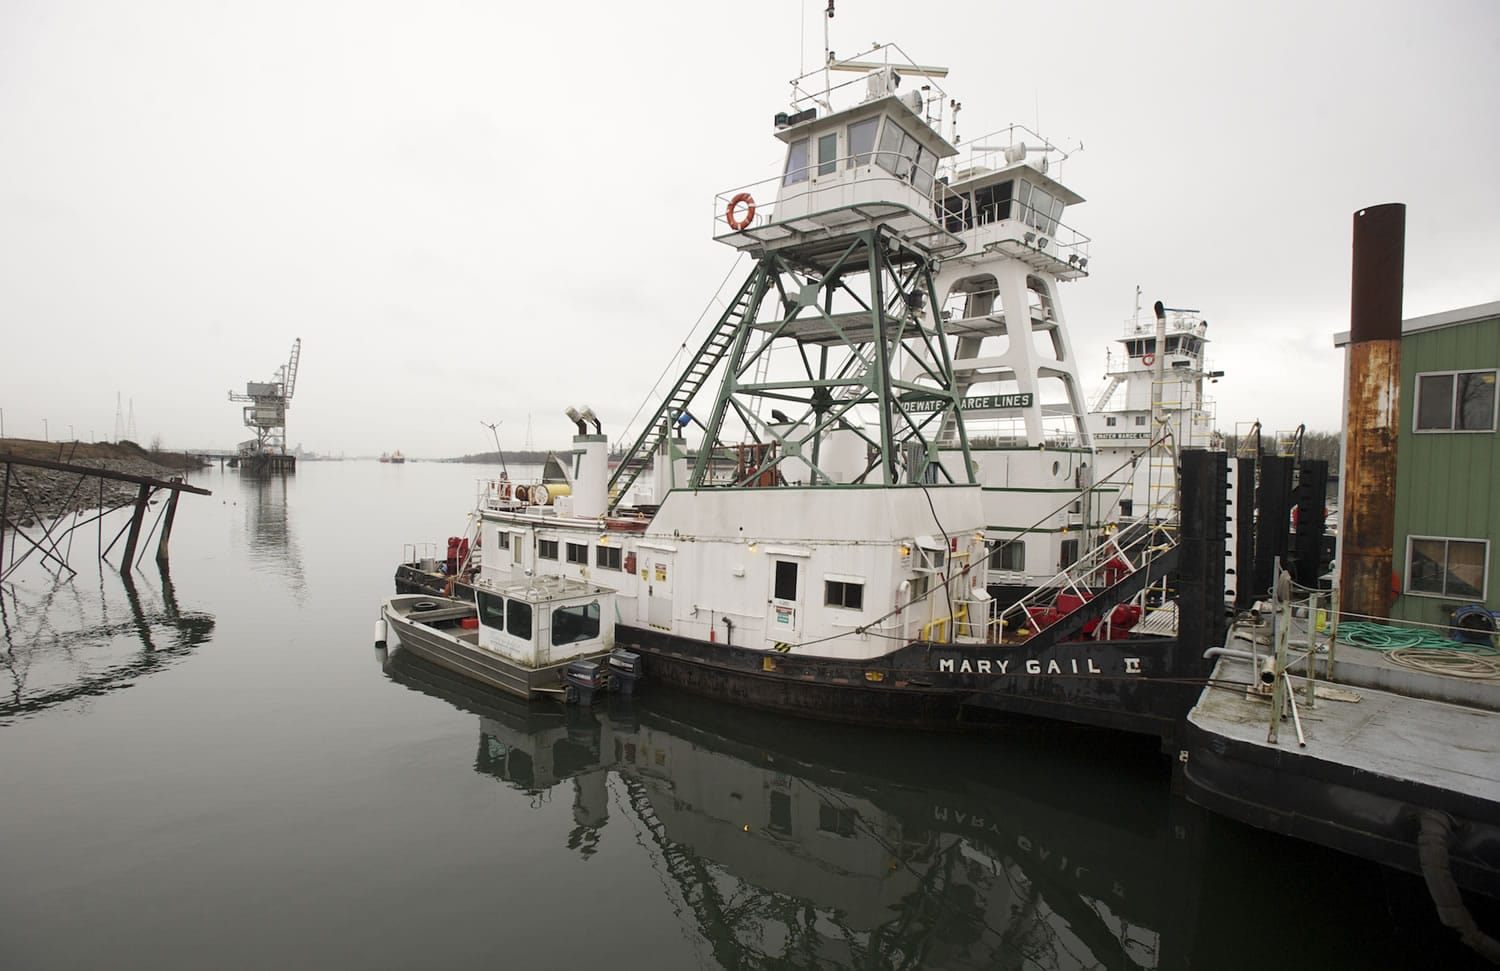 Tidewater Barge Lines Inc., on the Columbia River filed a complaint against the ILWU with National Labor Relations Board.